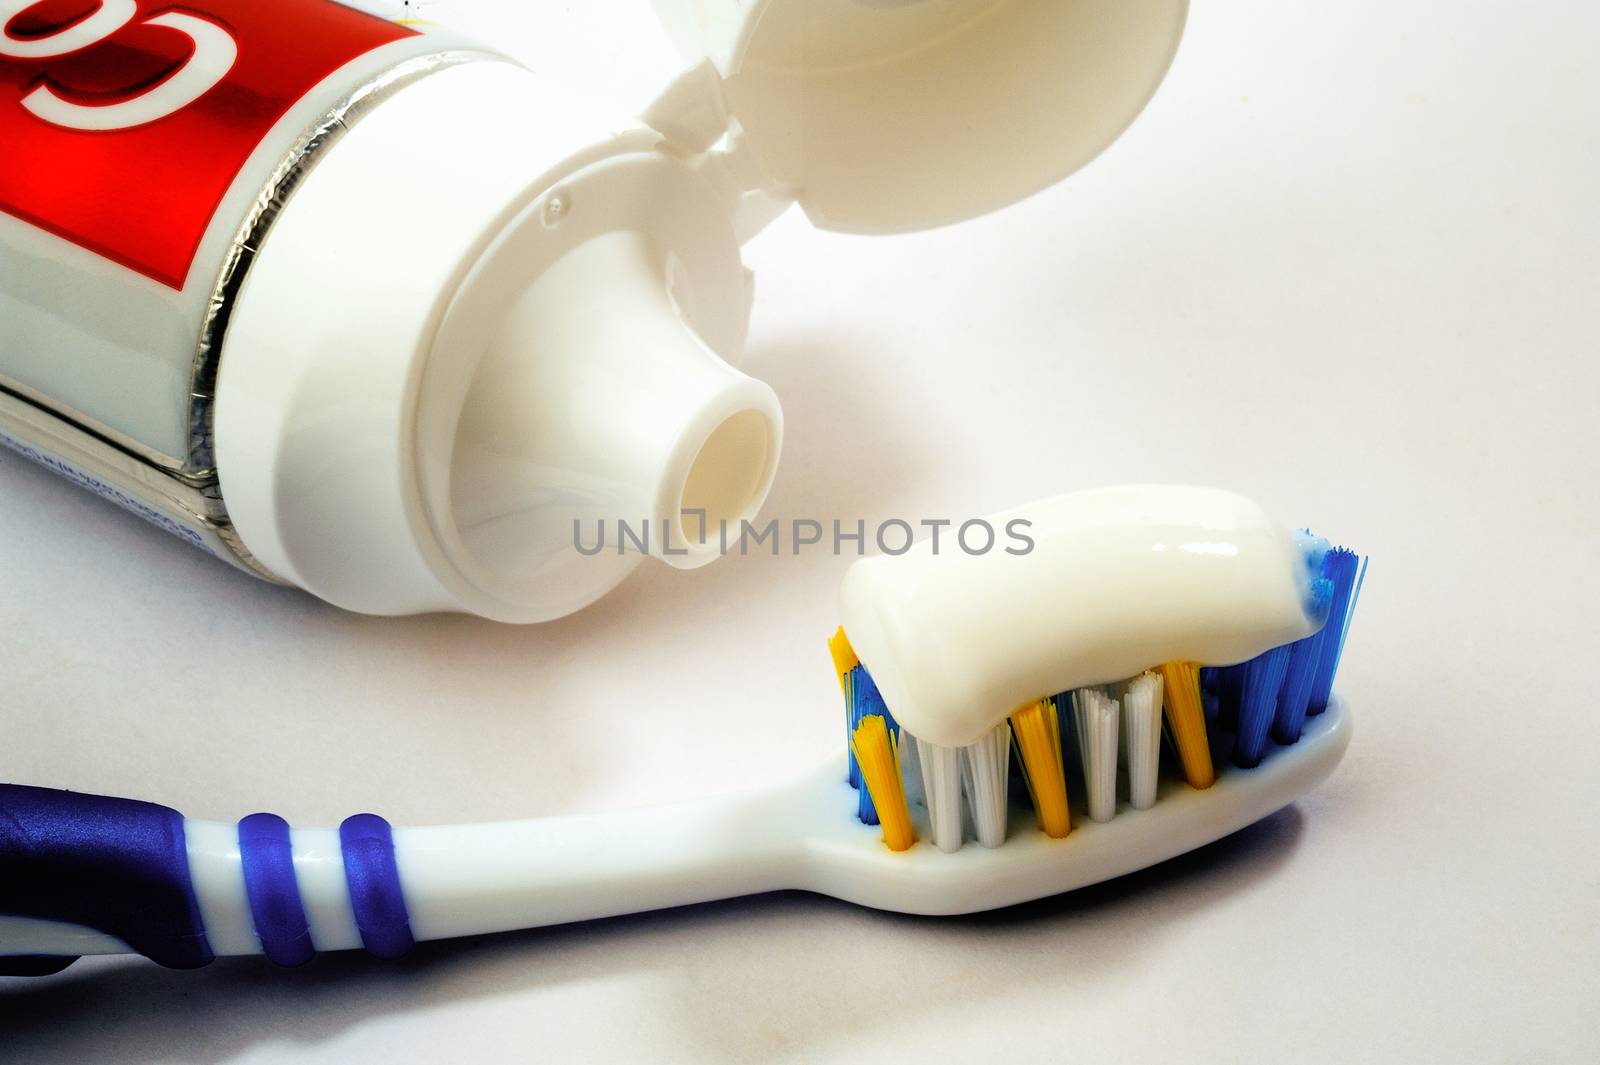 Entire tube of toothpaste with a toothbrush close-up on white background